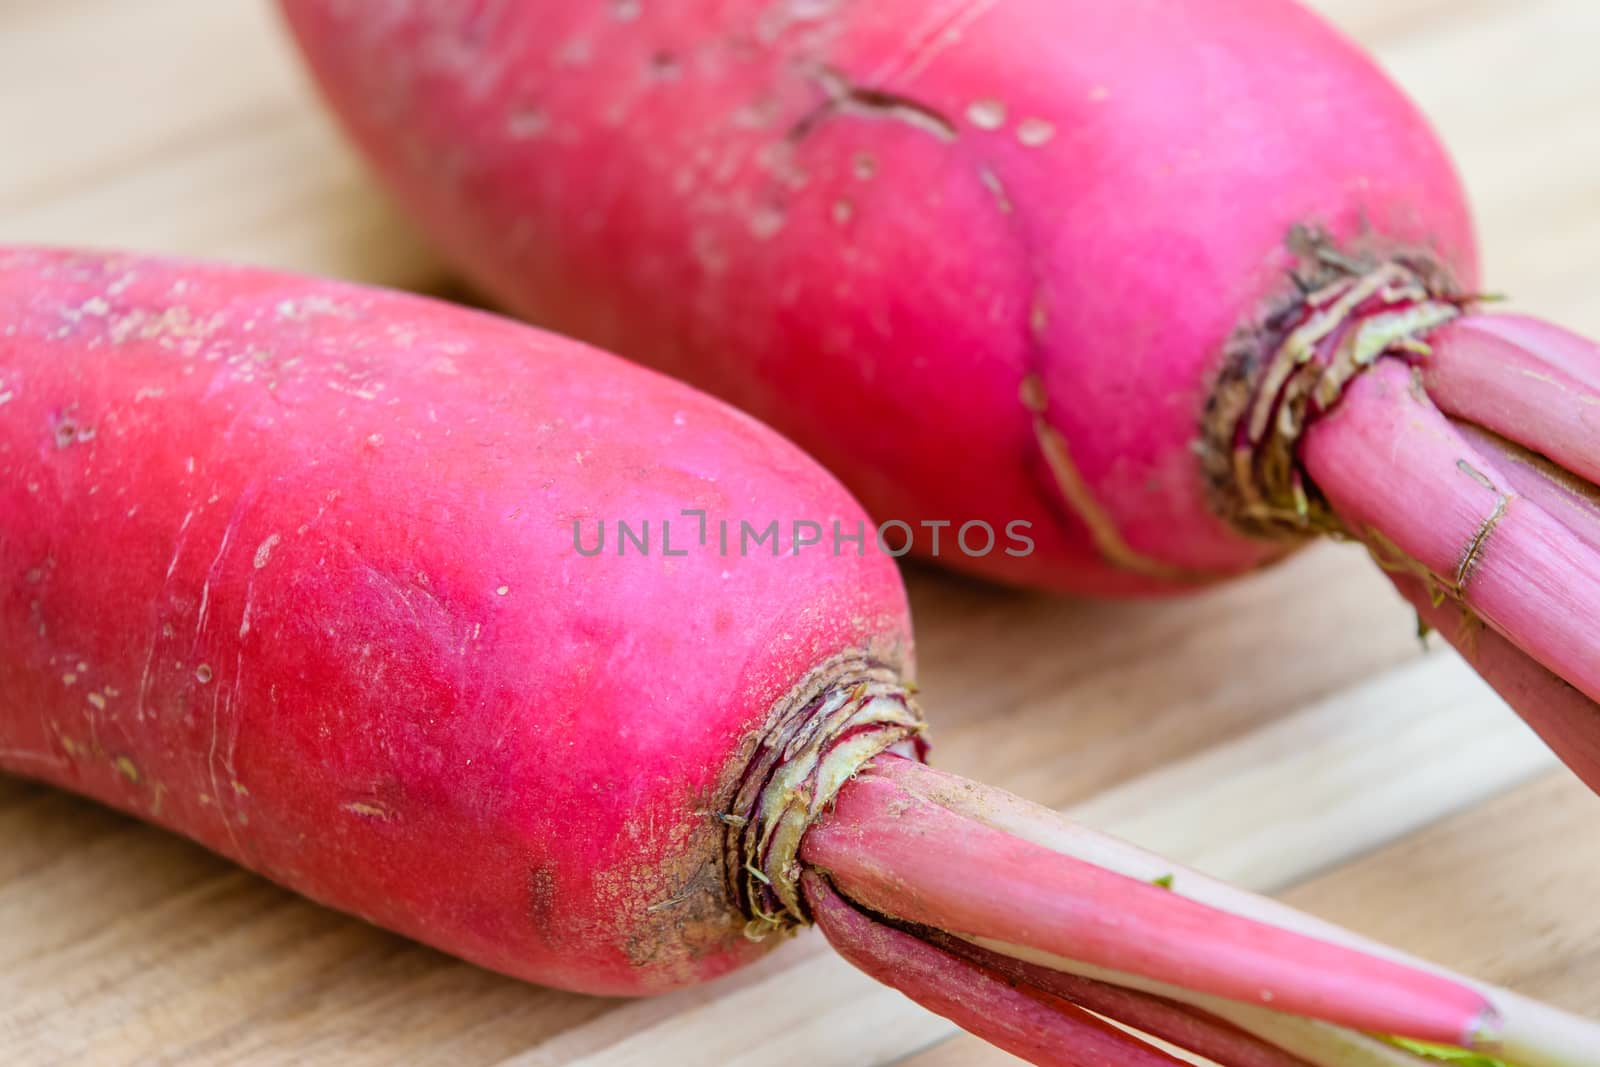 Red radish on wooden table